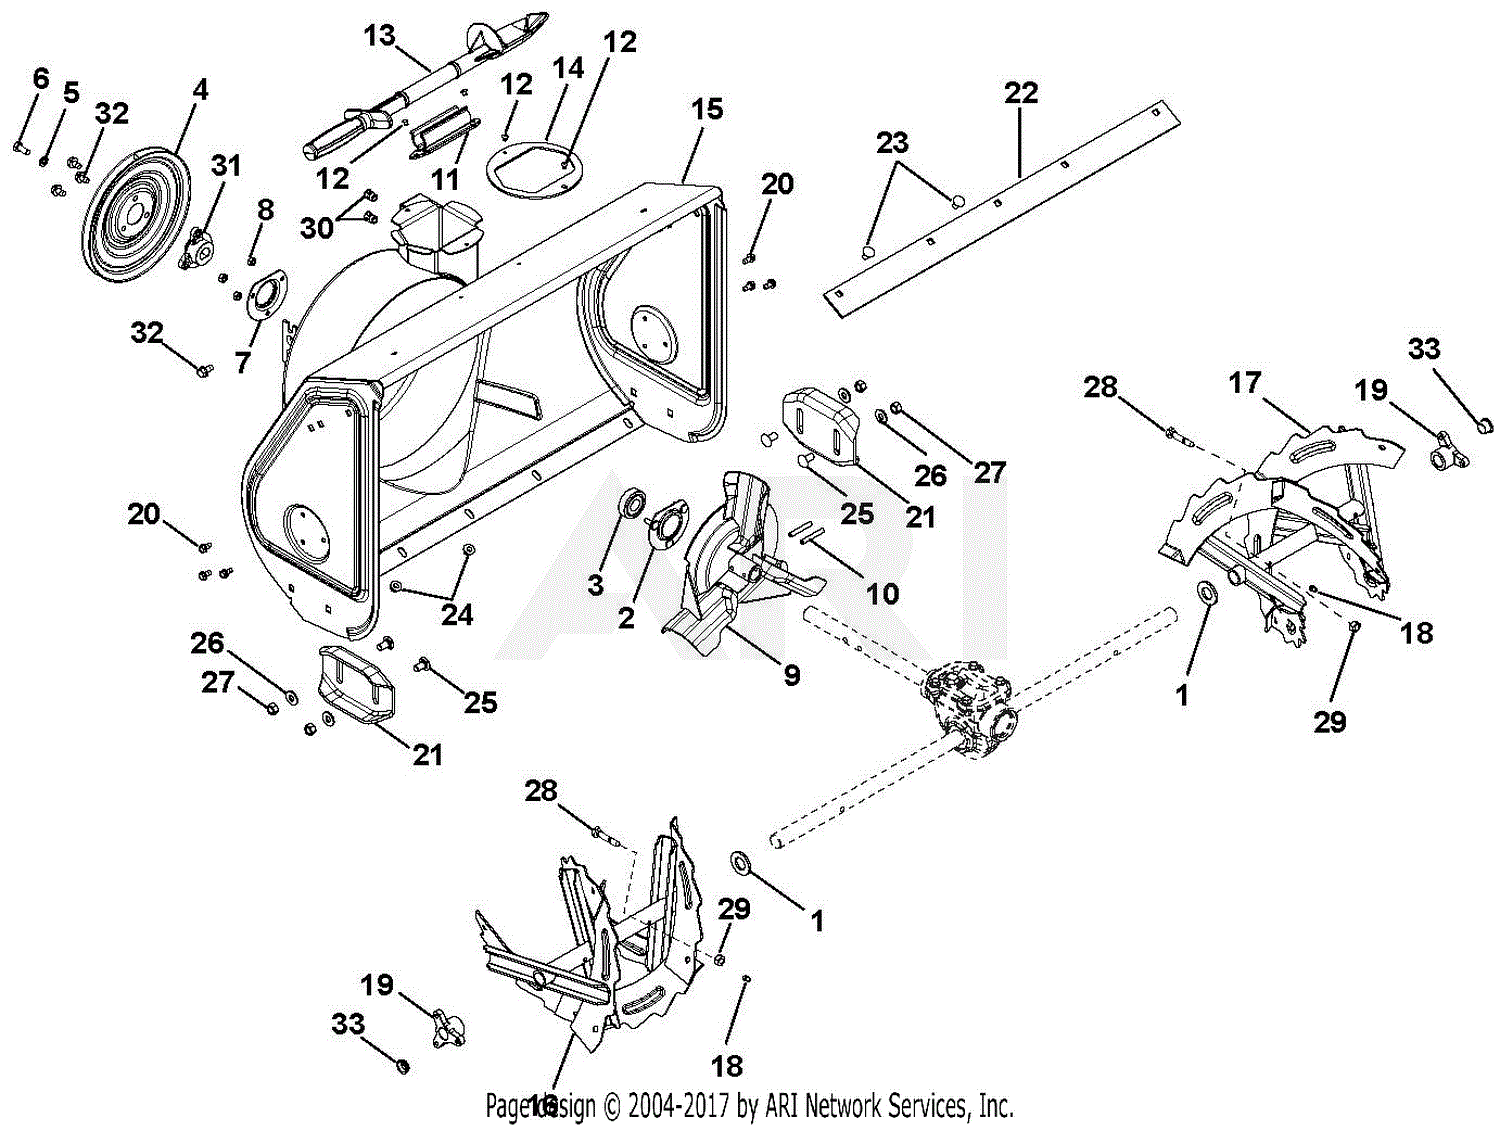 Ariens 920021 (000101 - 075999 ) Compact 24 Parts Diagram for Auger And